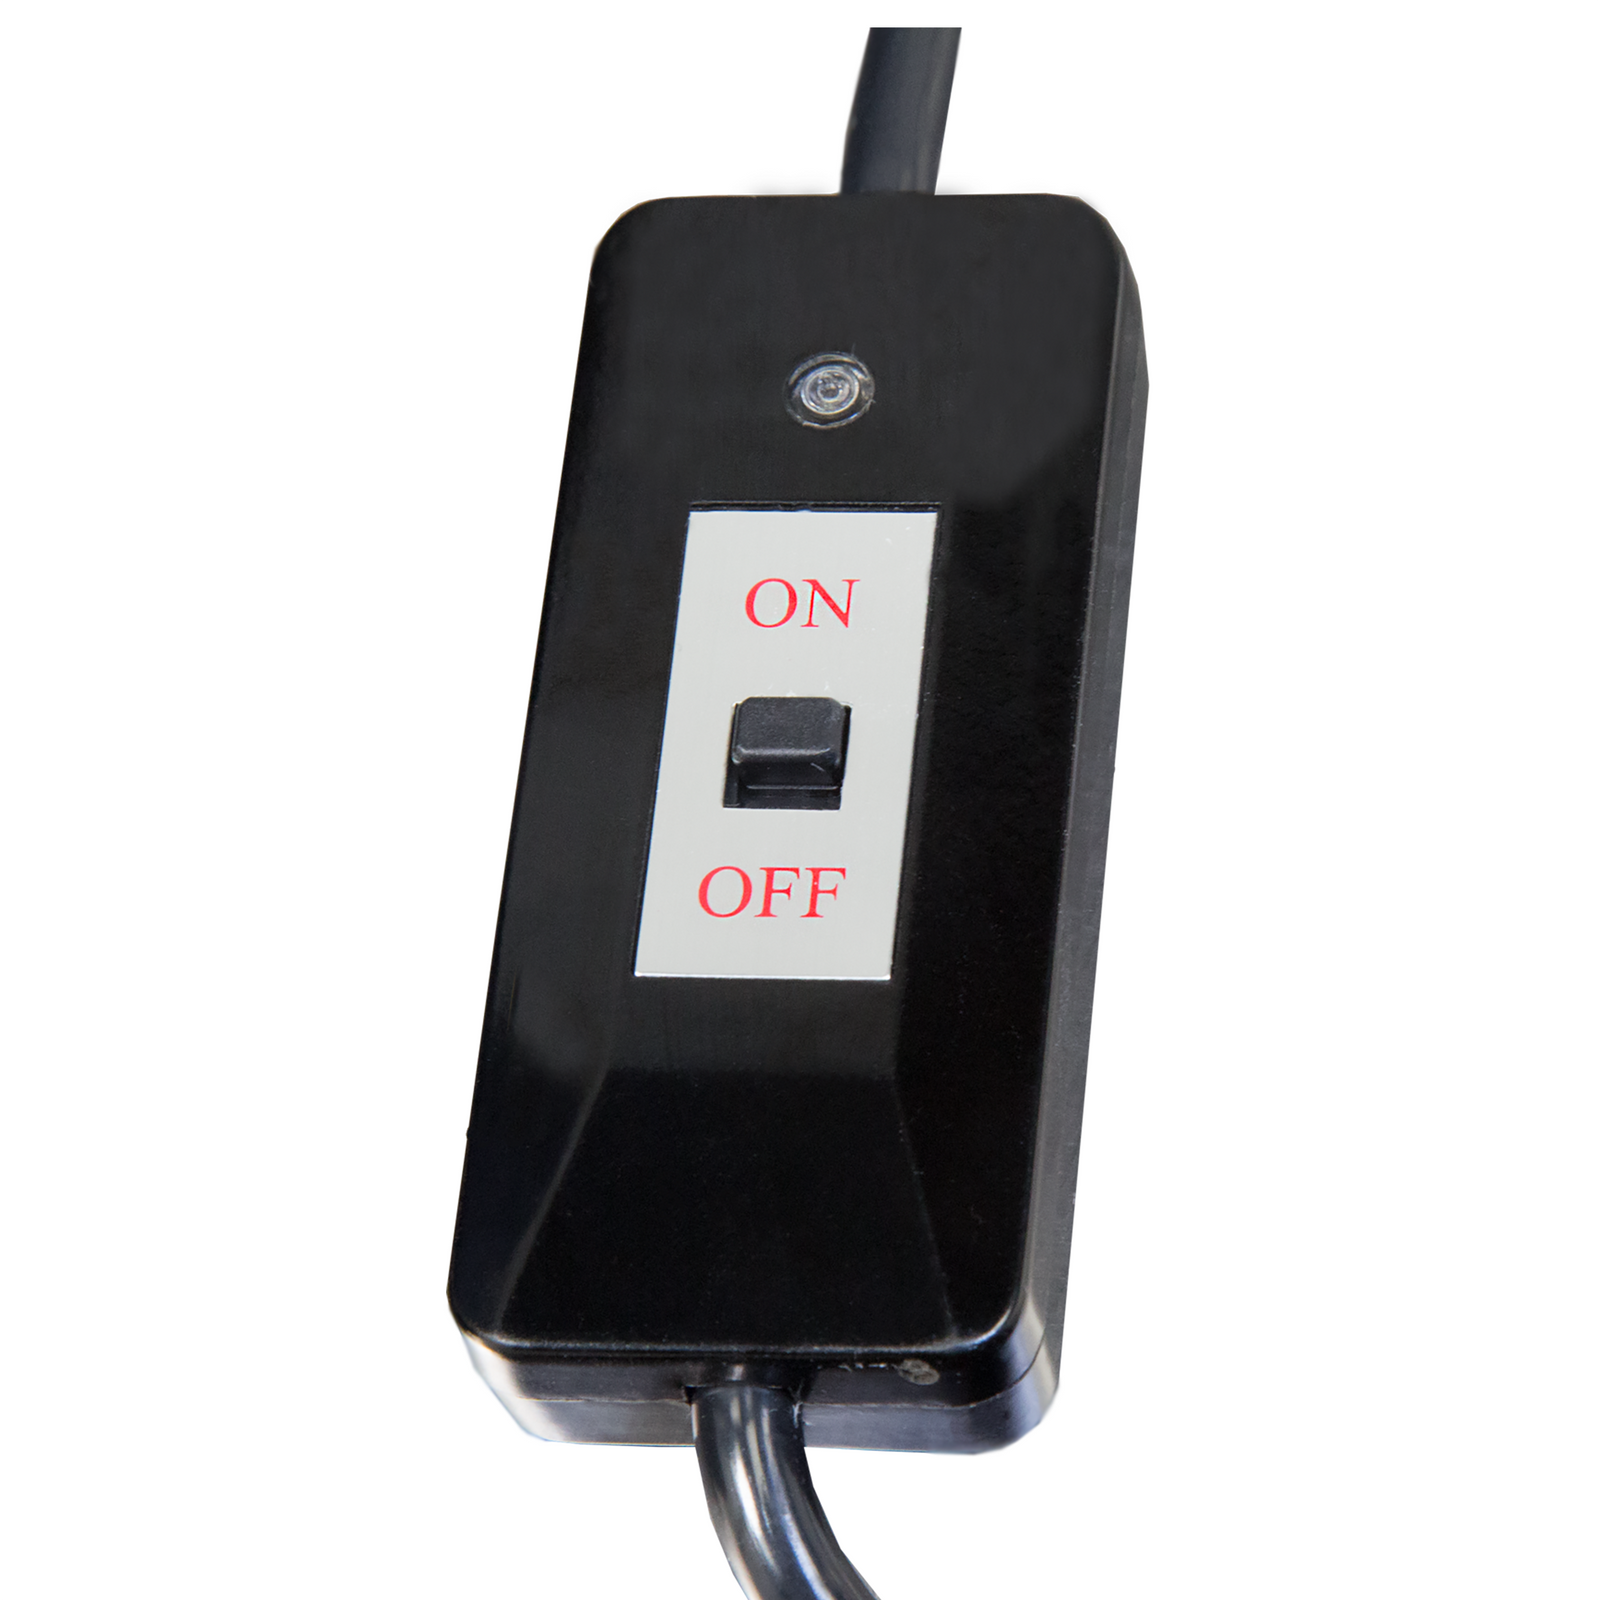 on and off switch in red text on gray label over black box for handheld crimp sealer